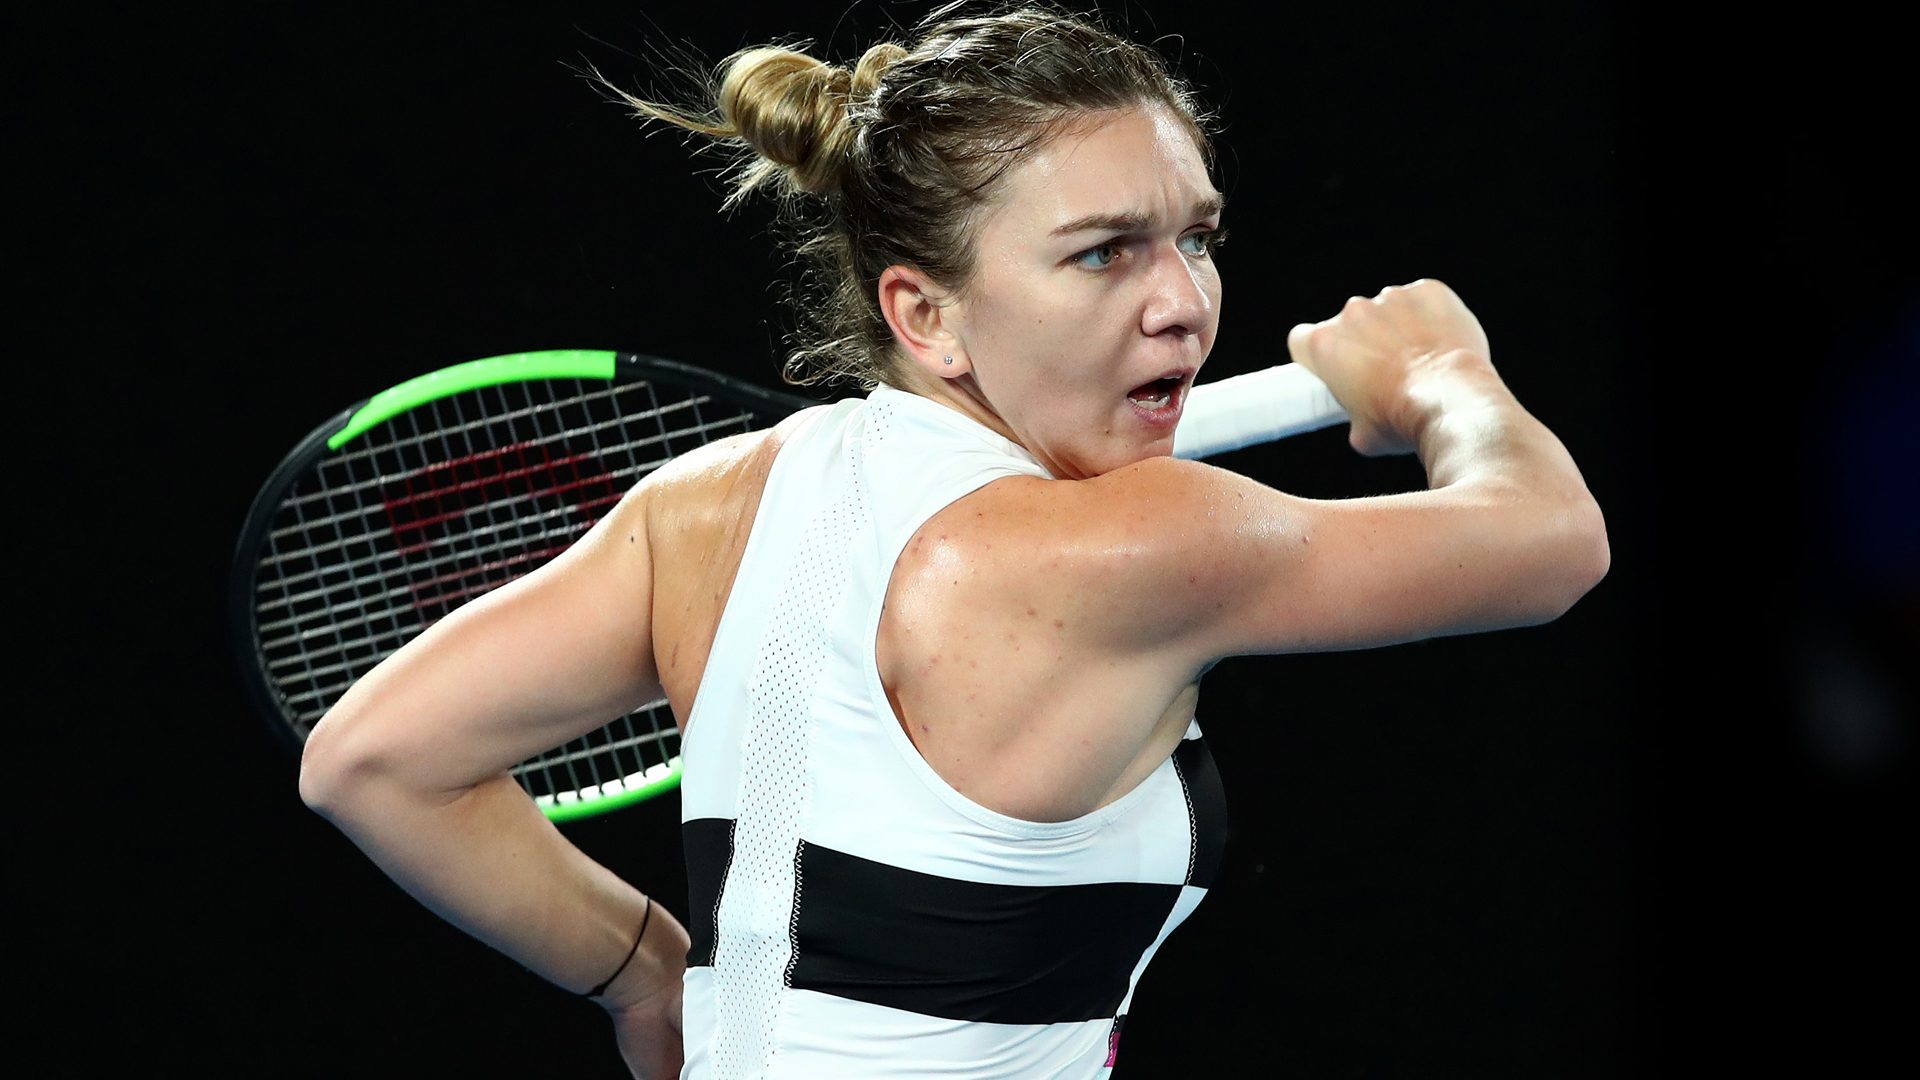 Simona Halep battled back in a second-set tie-break to see off Julia Goerges and set up a semi-final with Elina Svitolina in Doha.